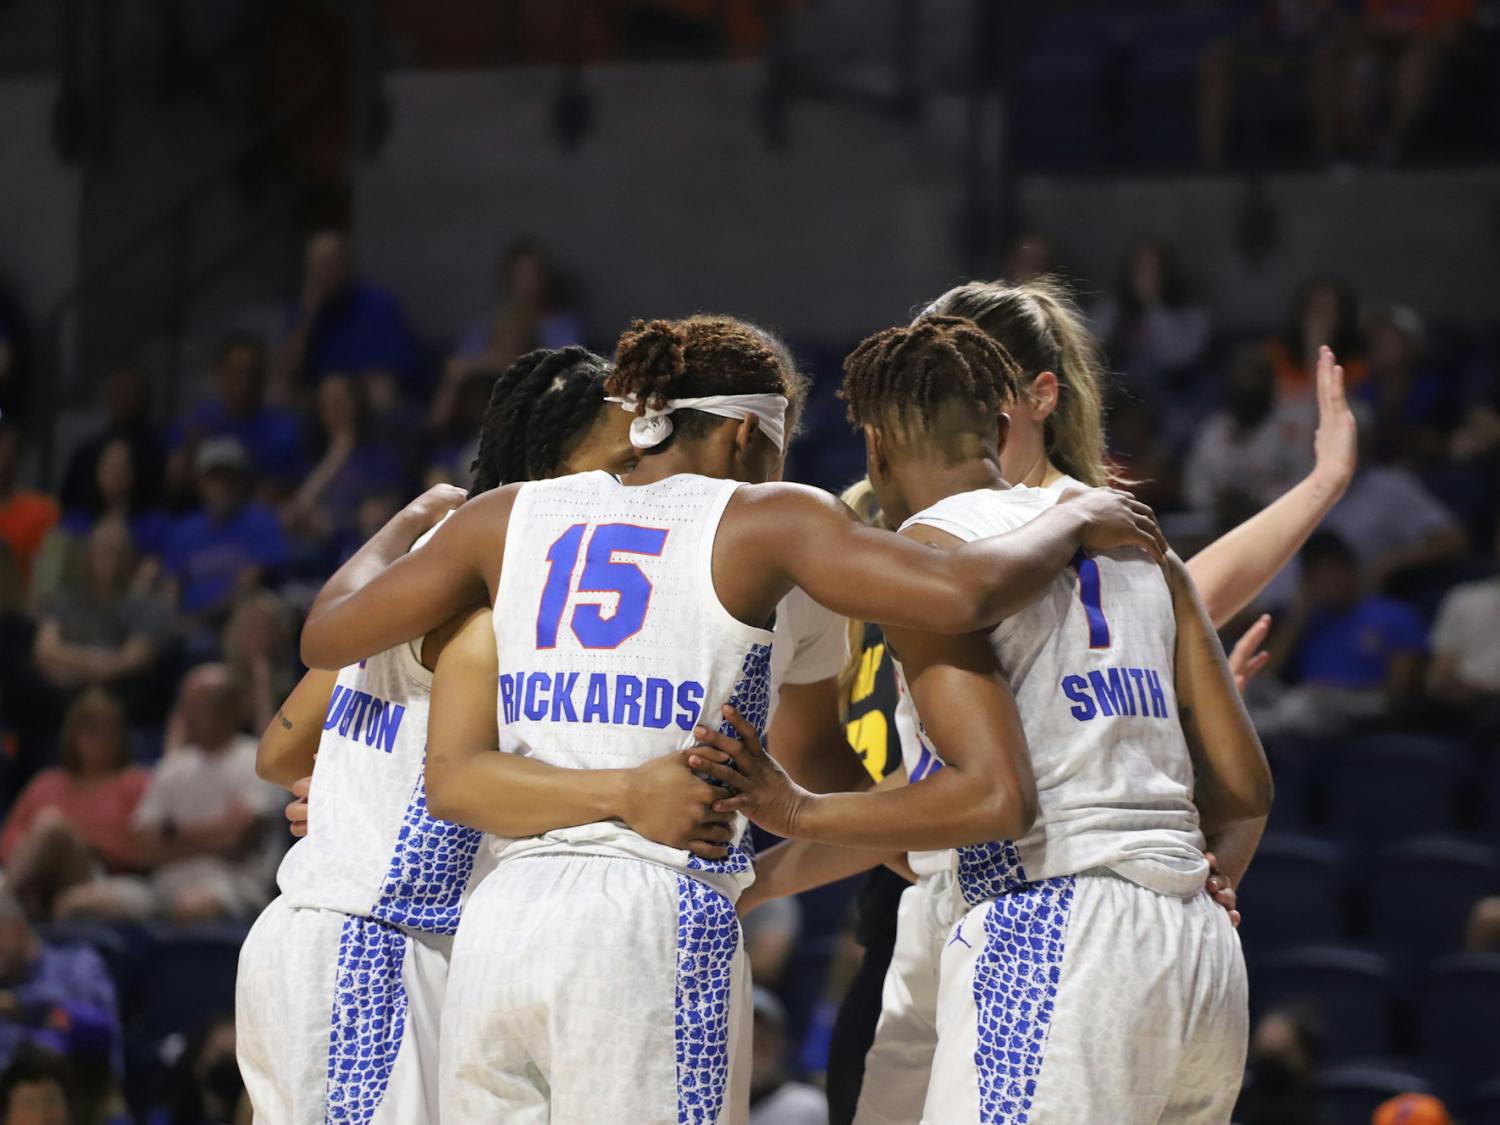 Florida women’s basketball in the first round of the NCAA National Championship tournament to No. 7-seed UCF